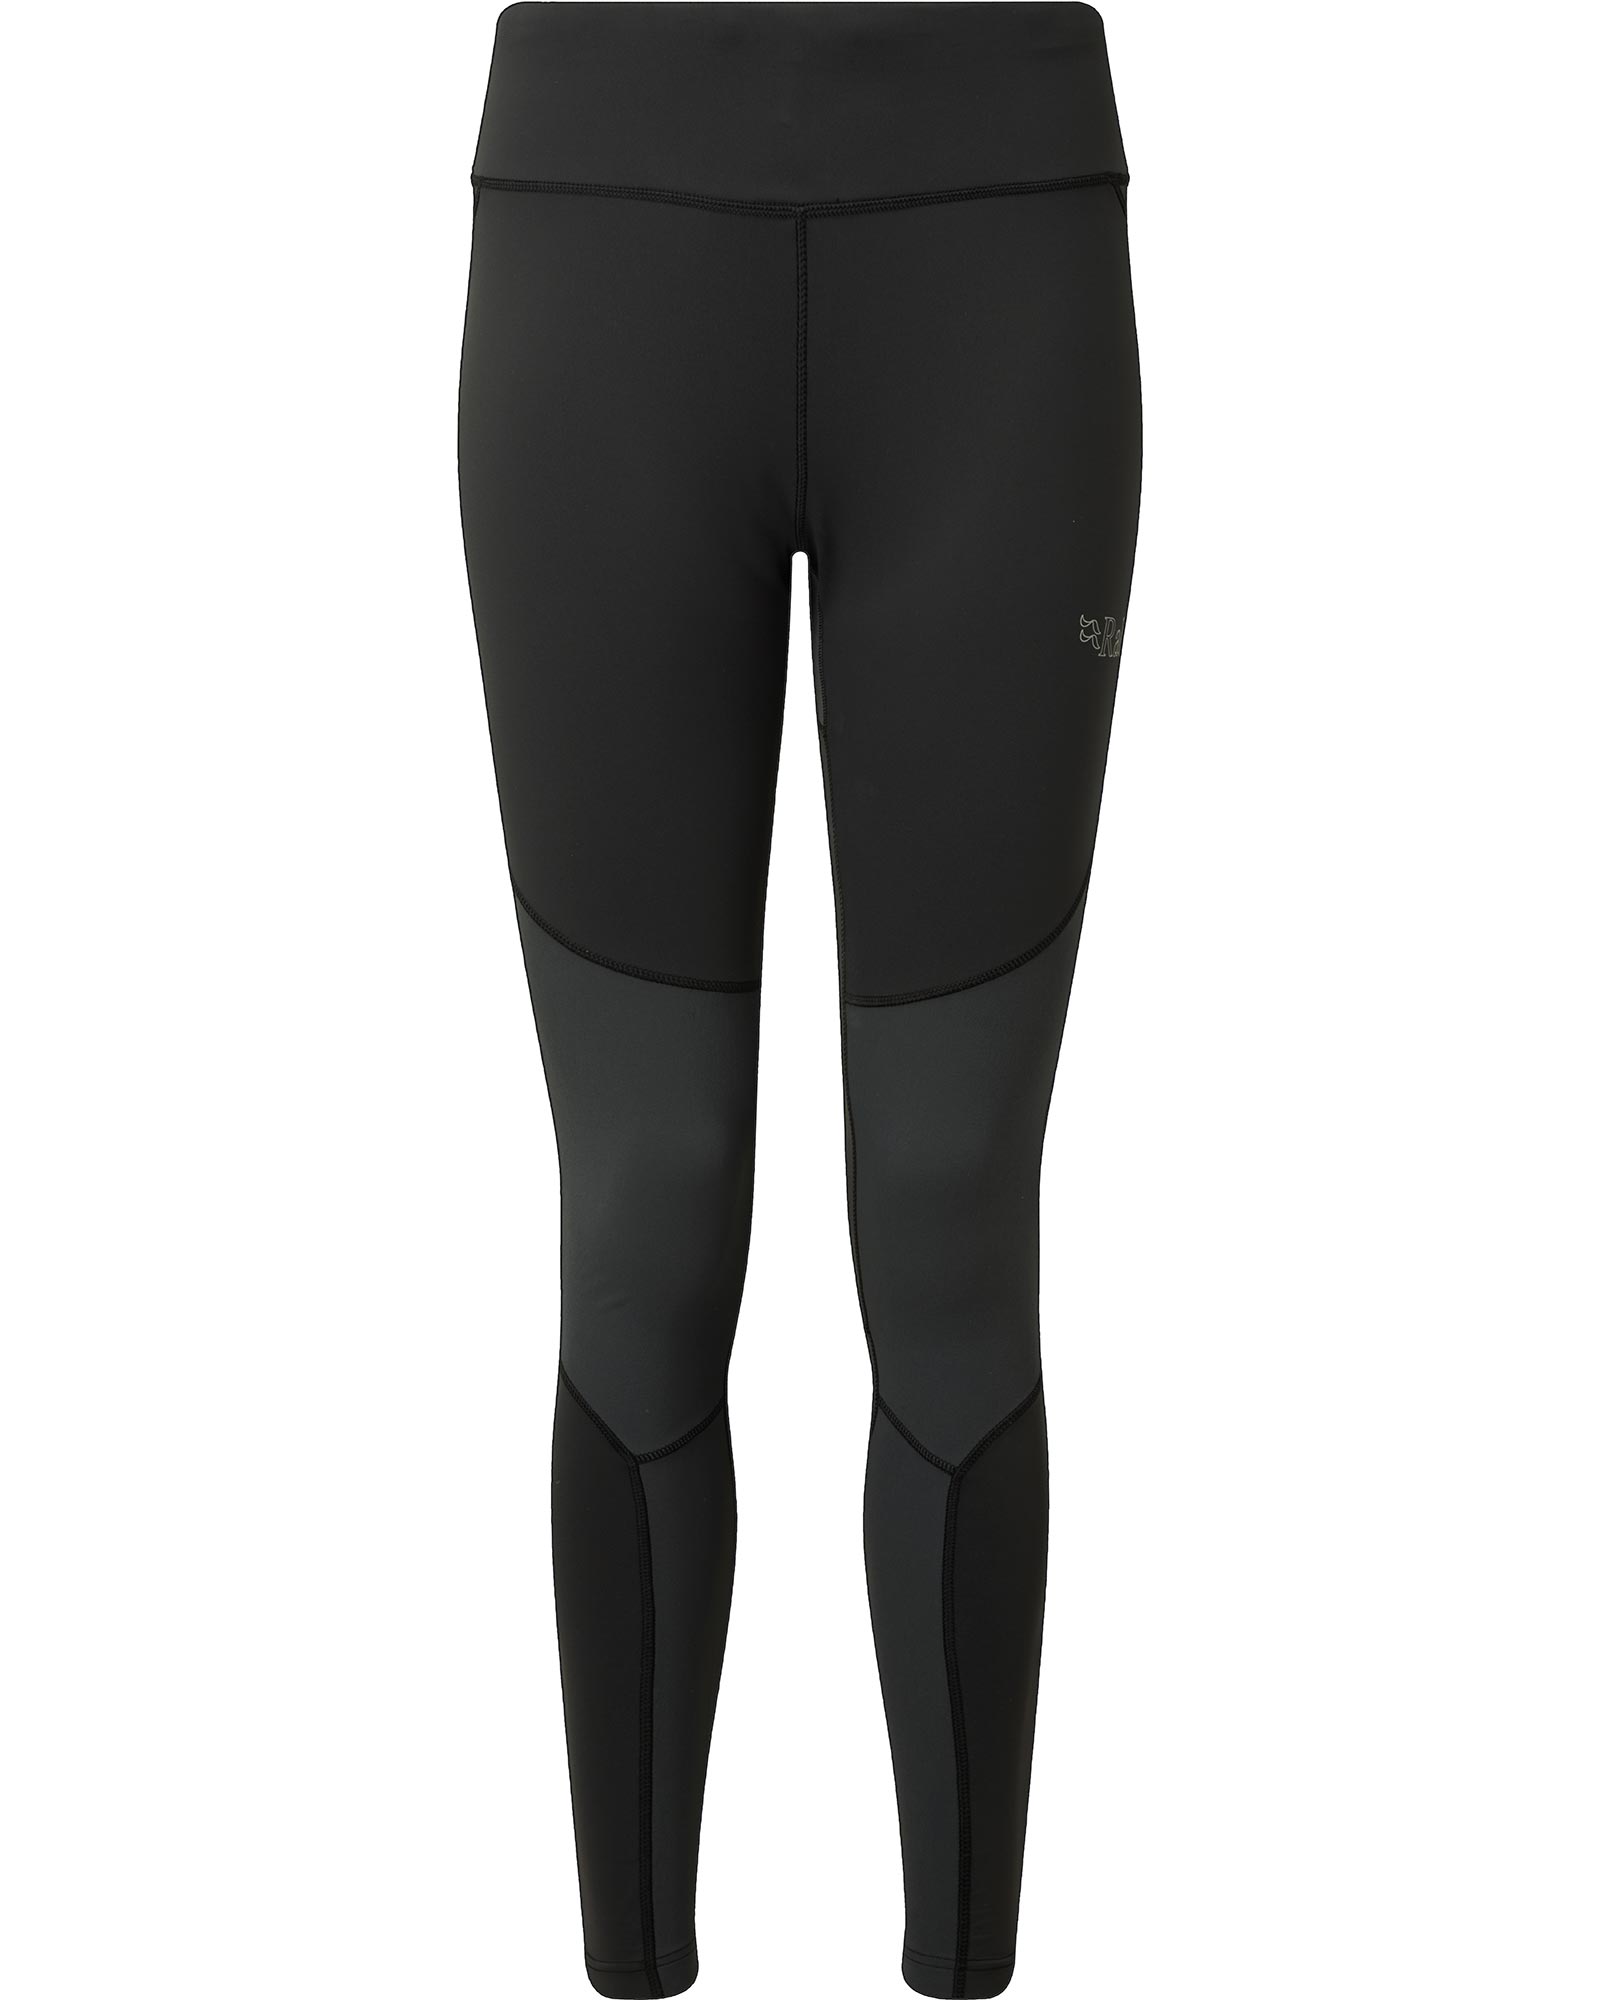 Rab Rhombic Tights - Women's, Black, Small, QFU-71-BL-10 — Womens Clothing  Size: Small, Gender: Female, Age Group: Adults, Apparel Application: Casual